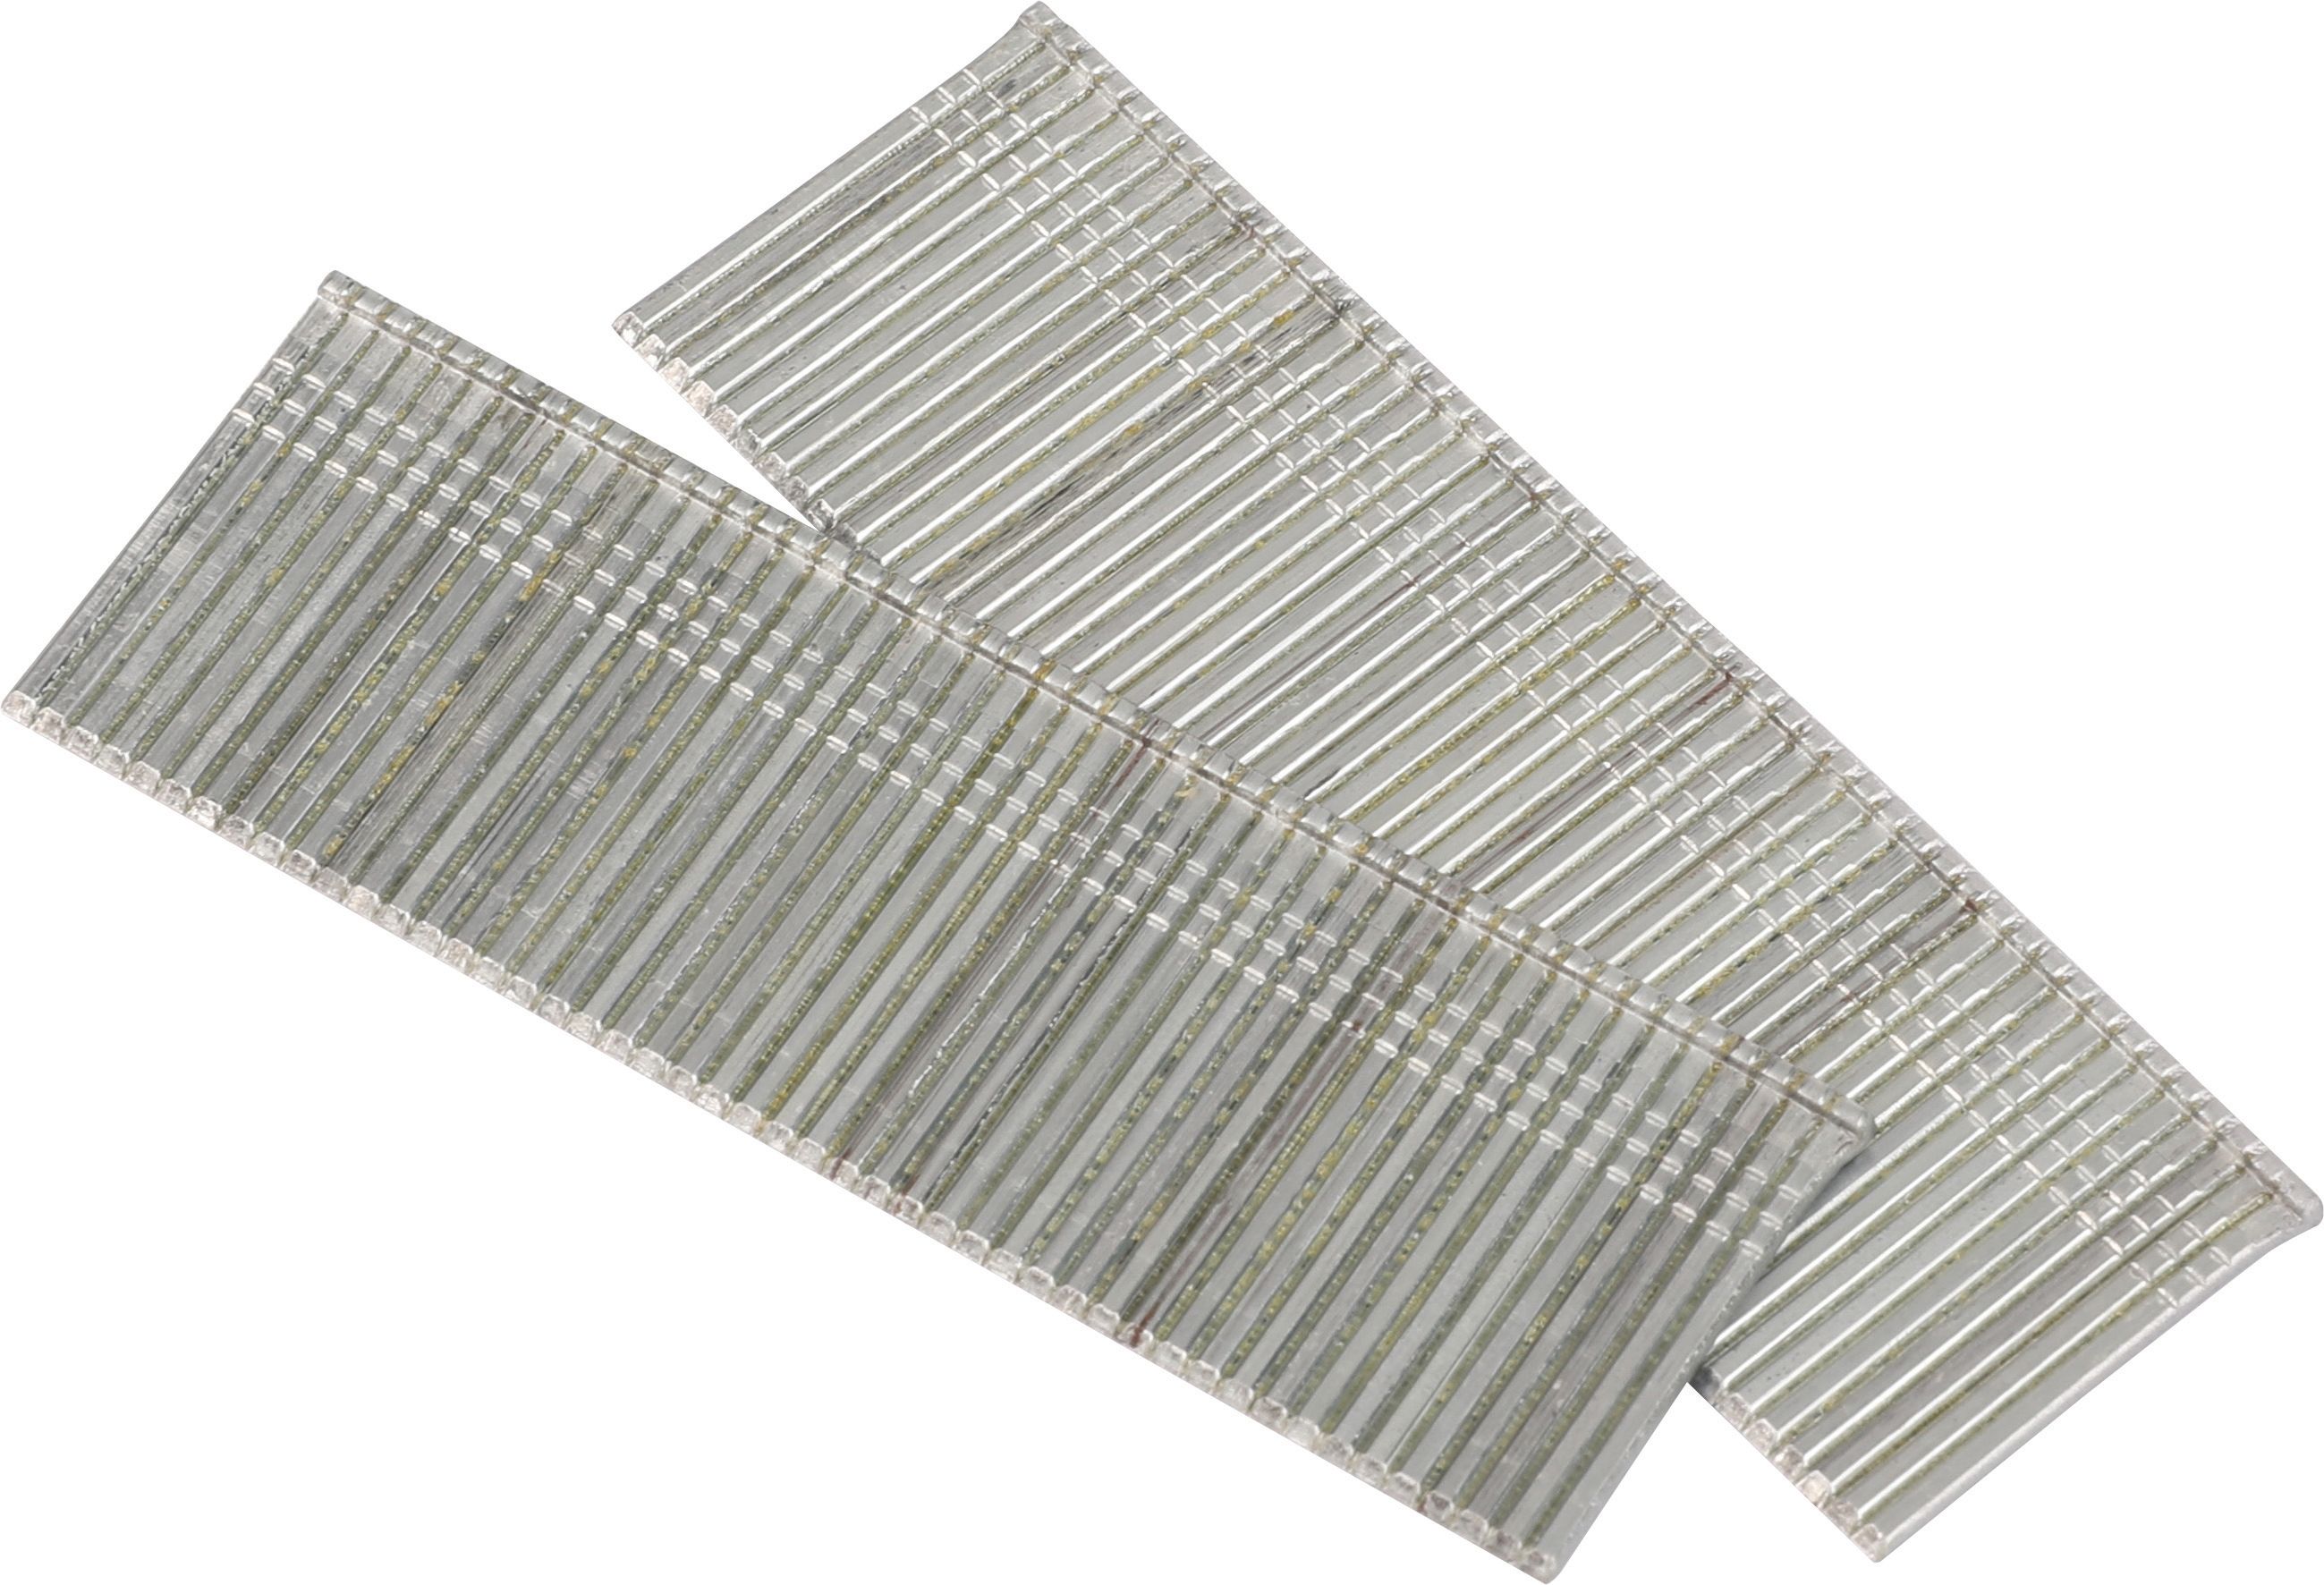 Wickes Brad Nails 25mm Pack 5000